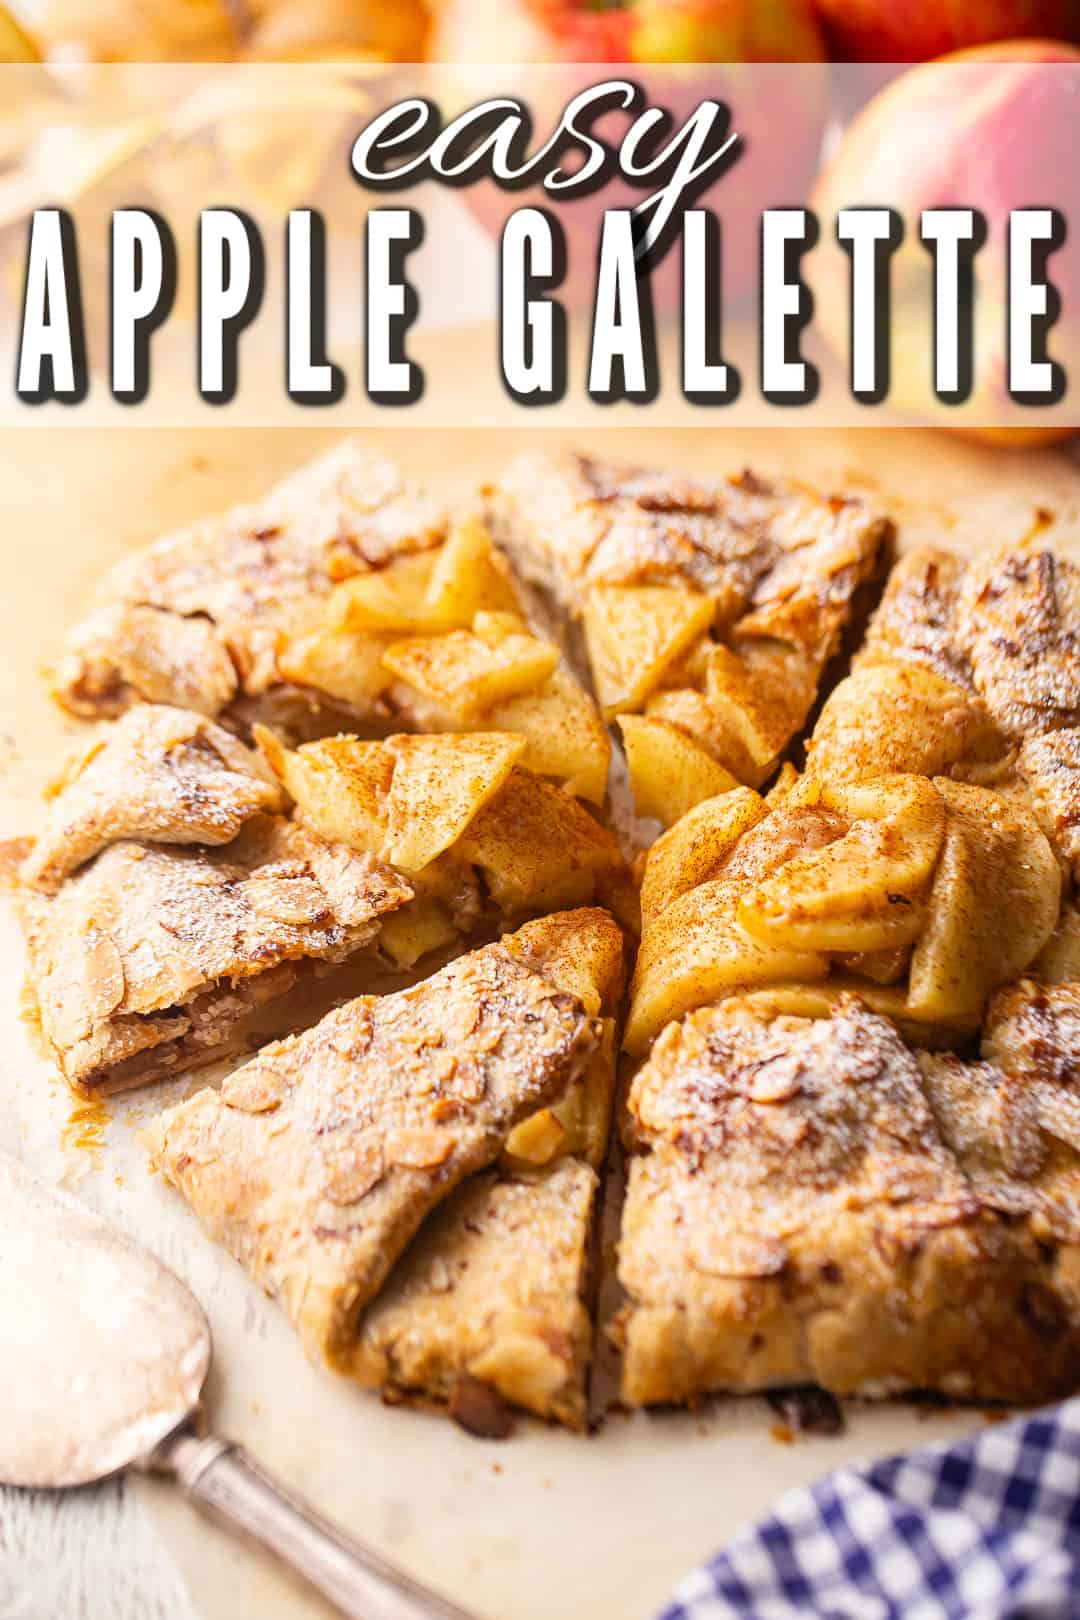 Easy apple galette recipe, baked and served with a blue checked cloth.